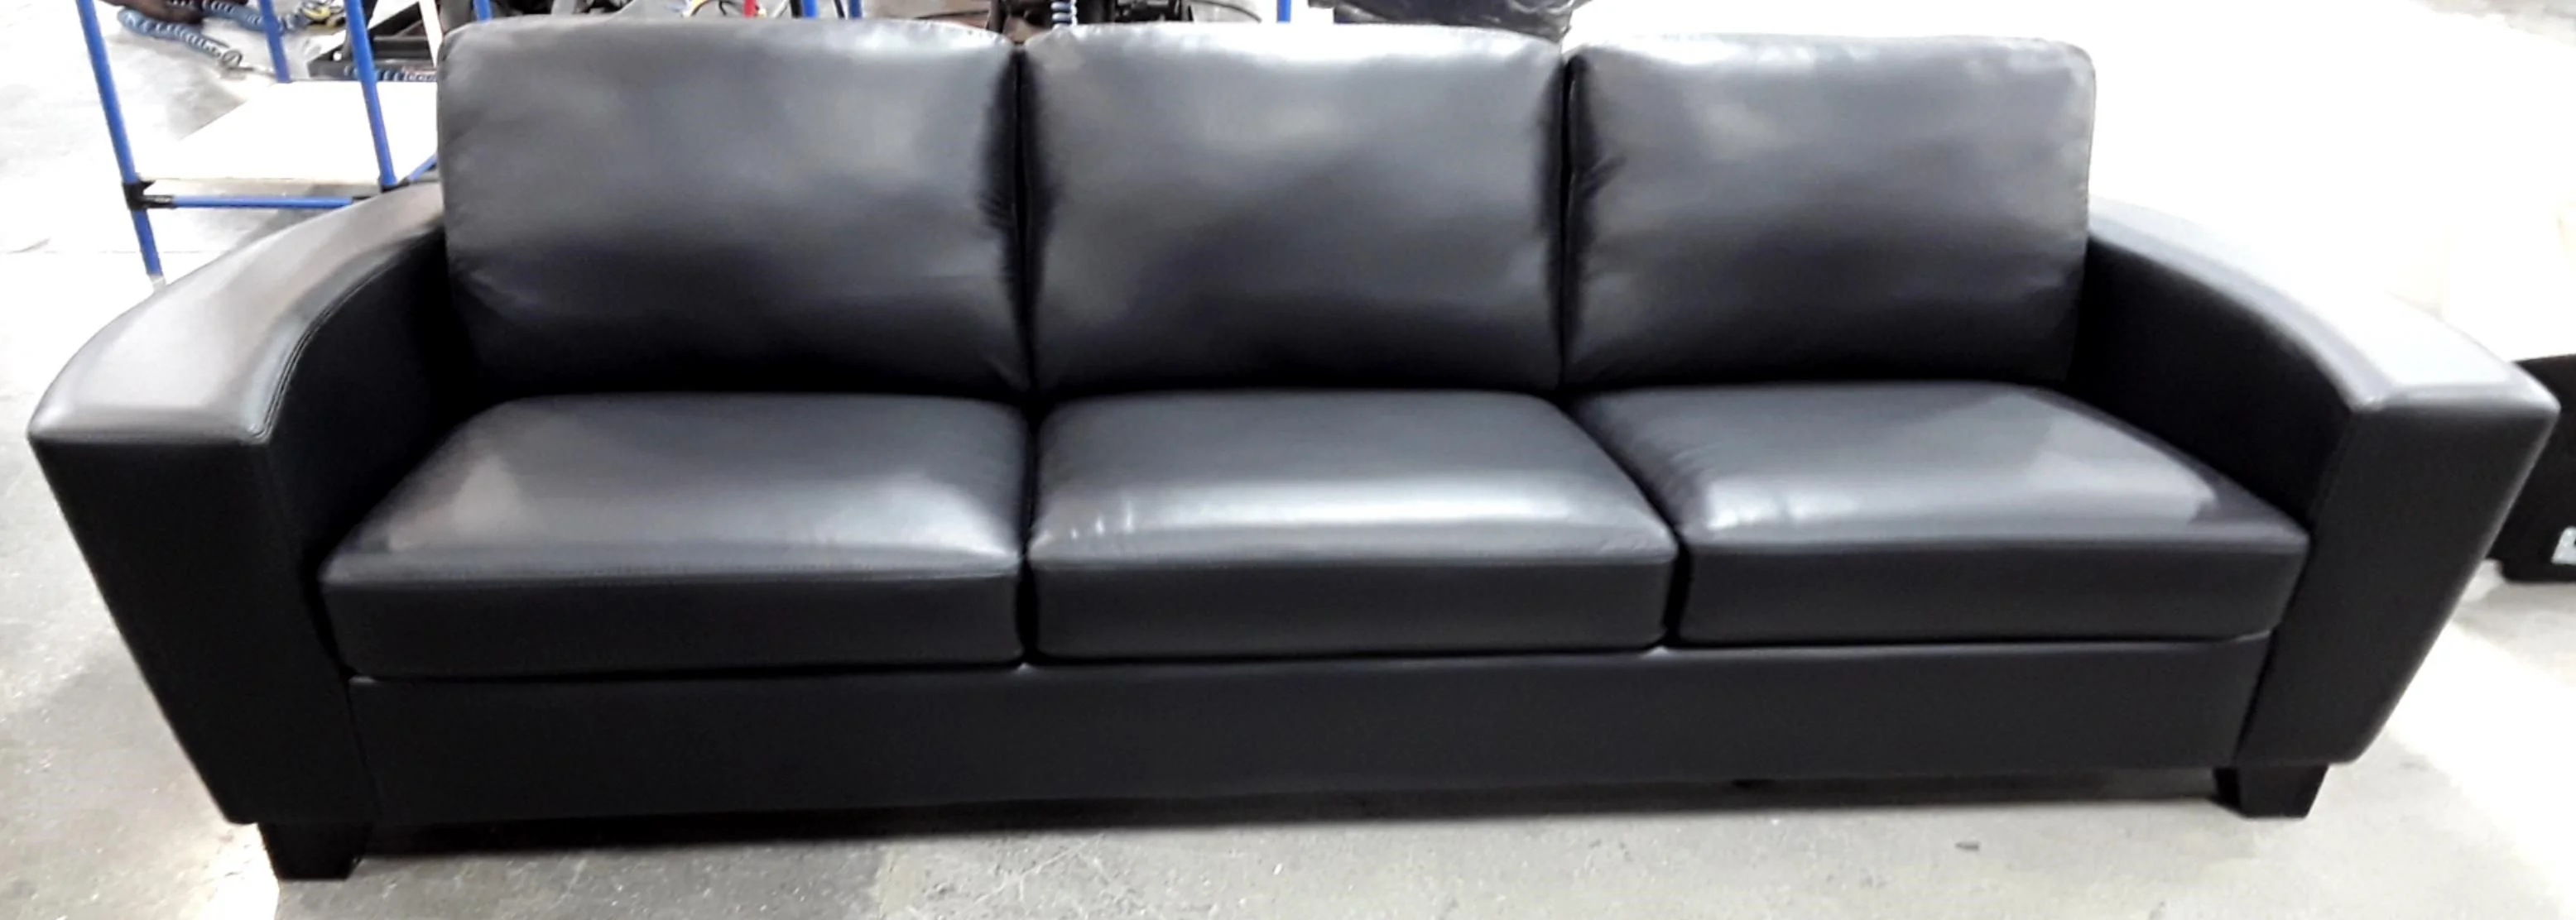 Palliser Leeds Contemporary Sofa With Curved Track Arm Reeds